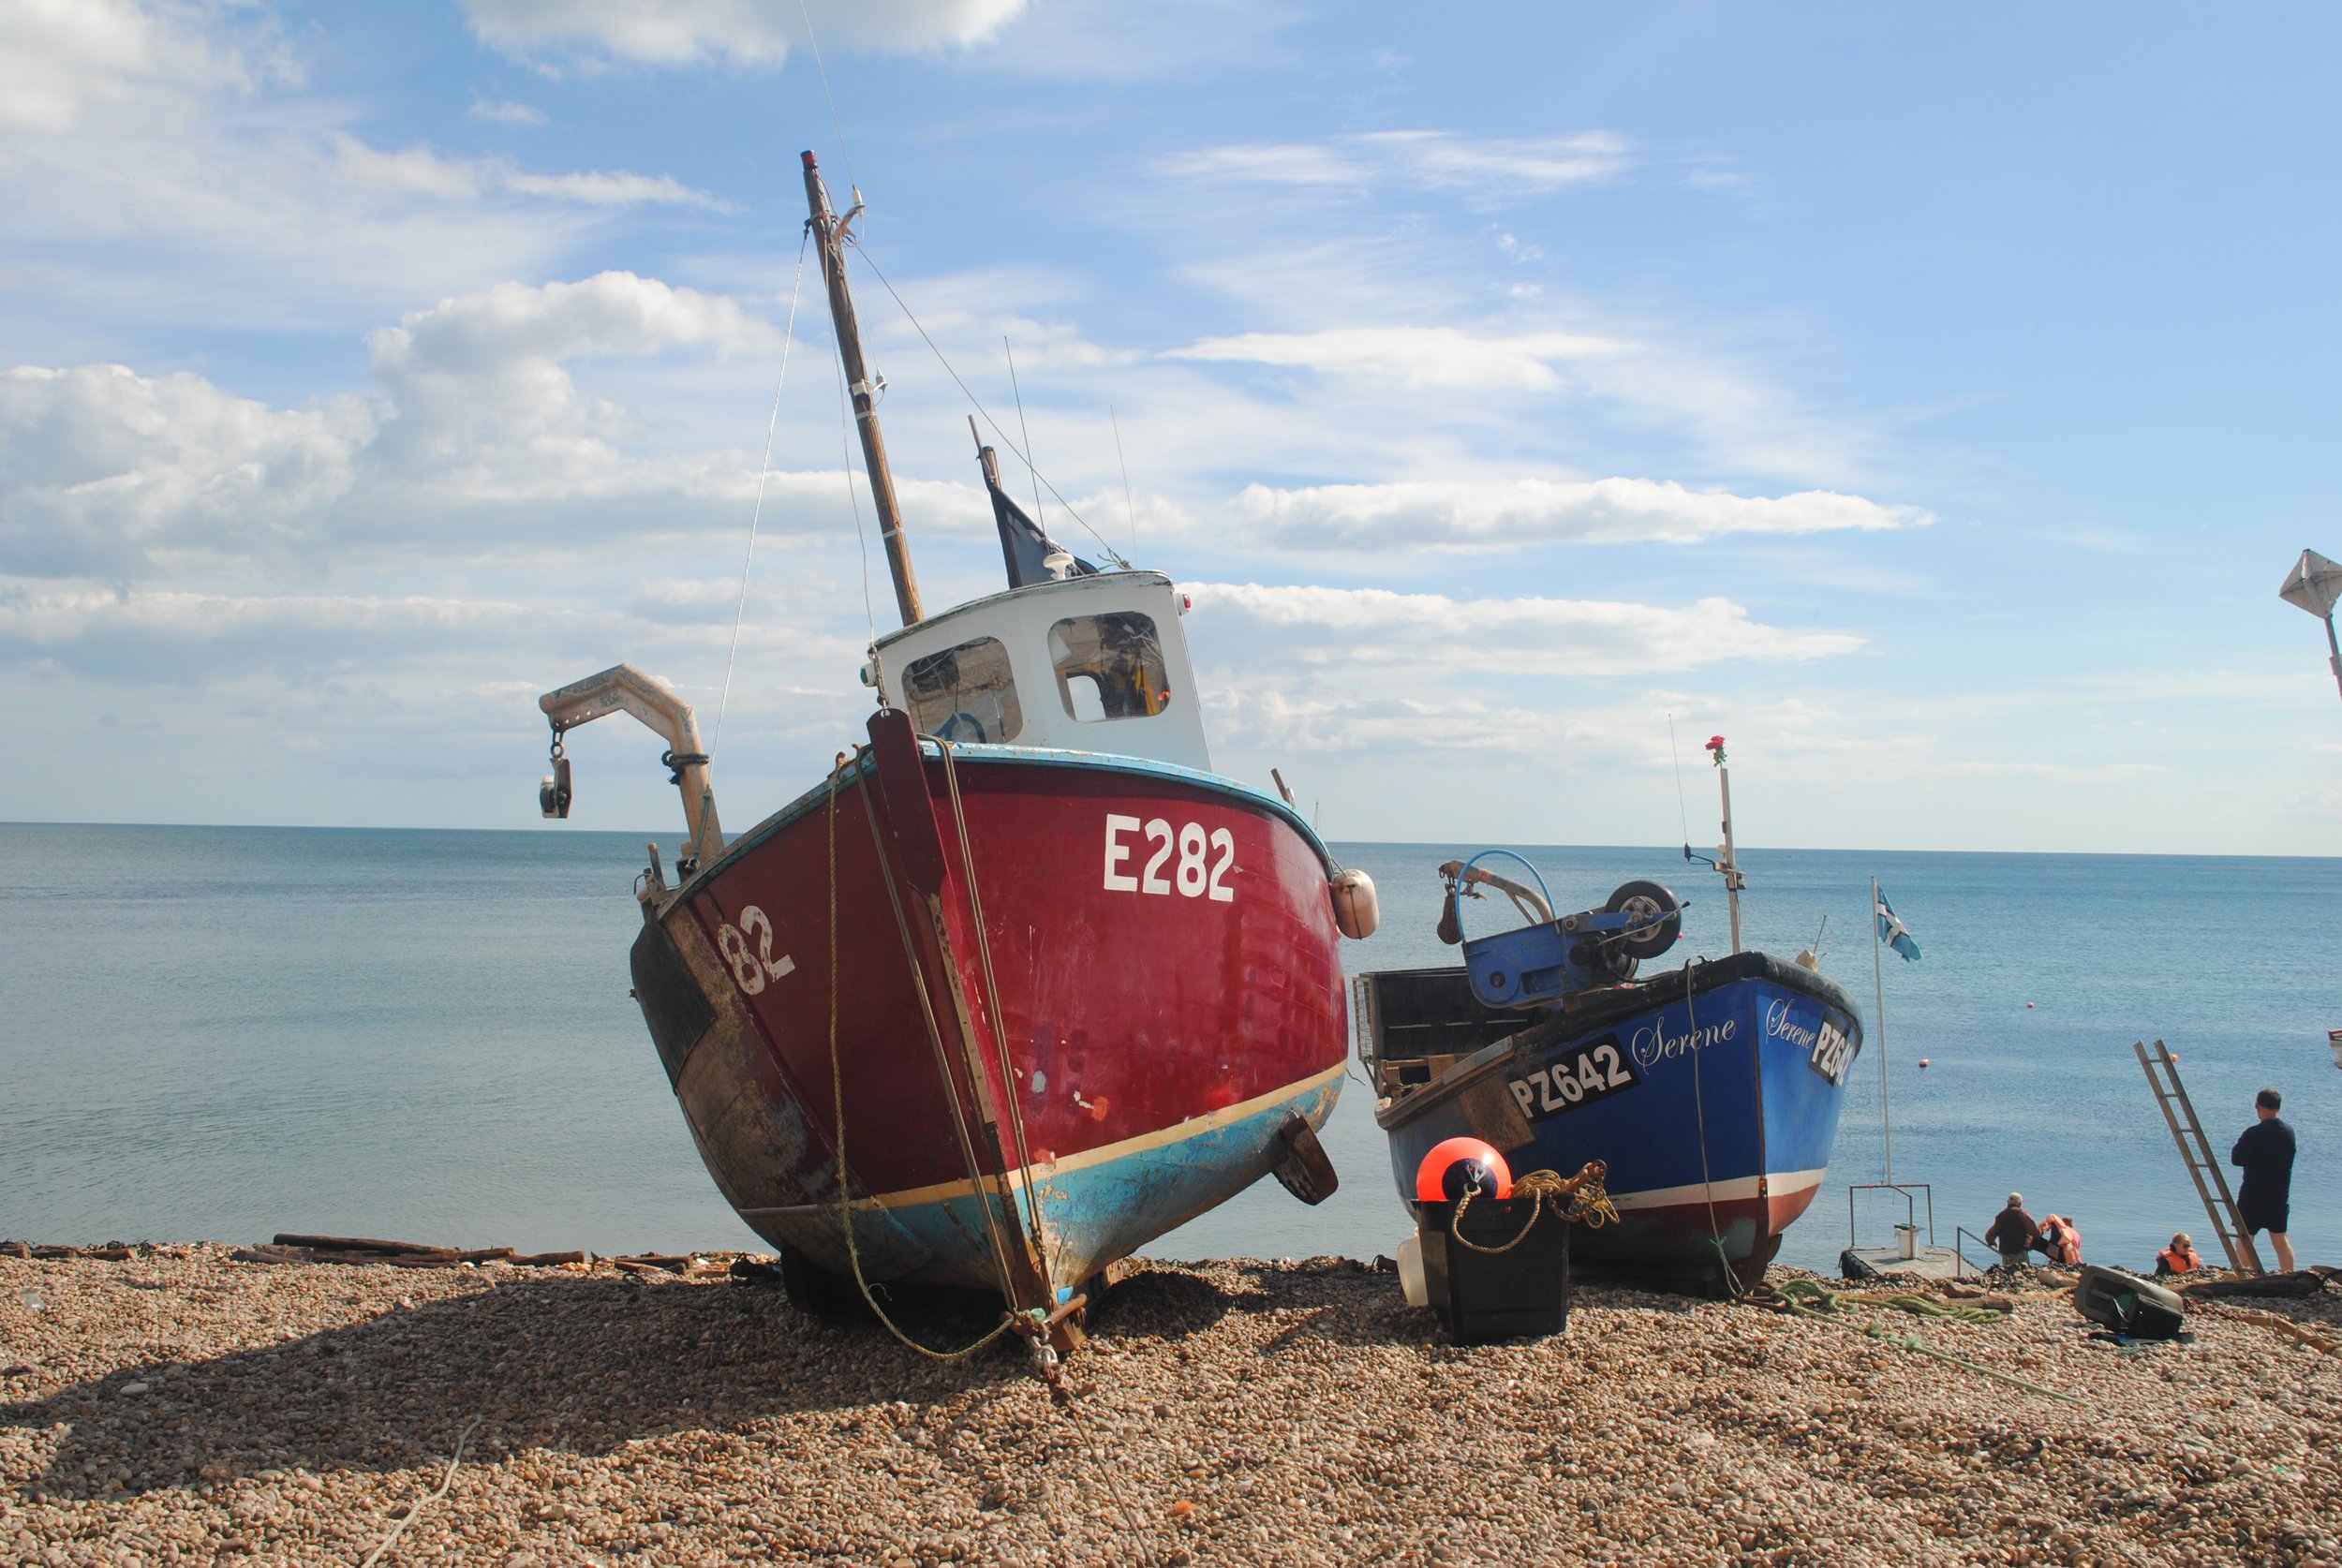 Lyme Bay Fisheries and Conservation Reserve - Free Copyrights_2.jpg